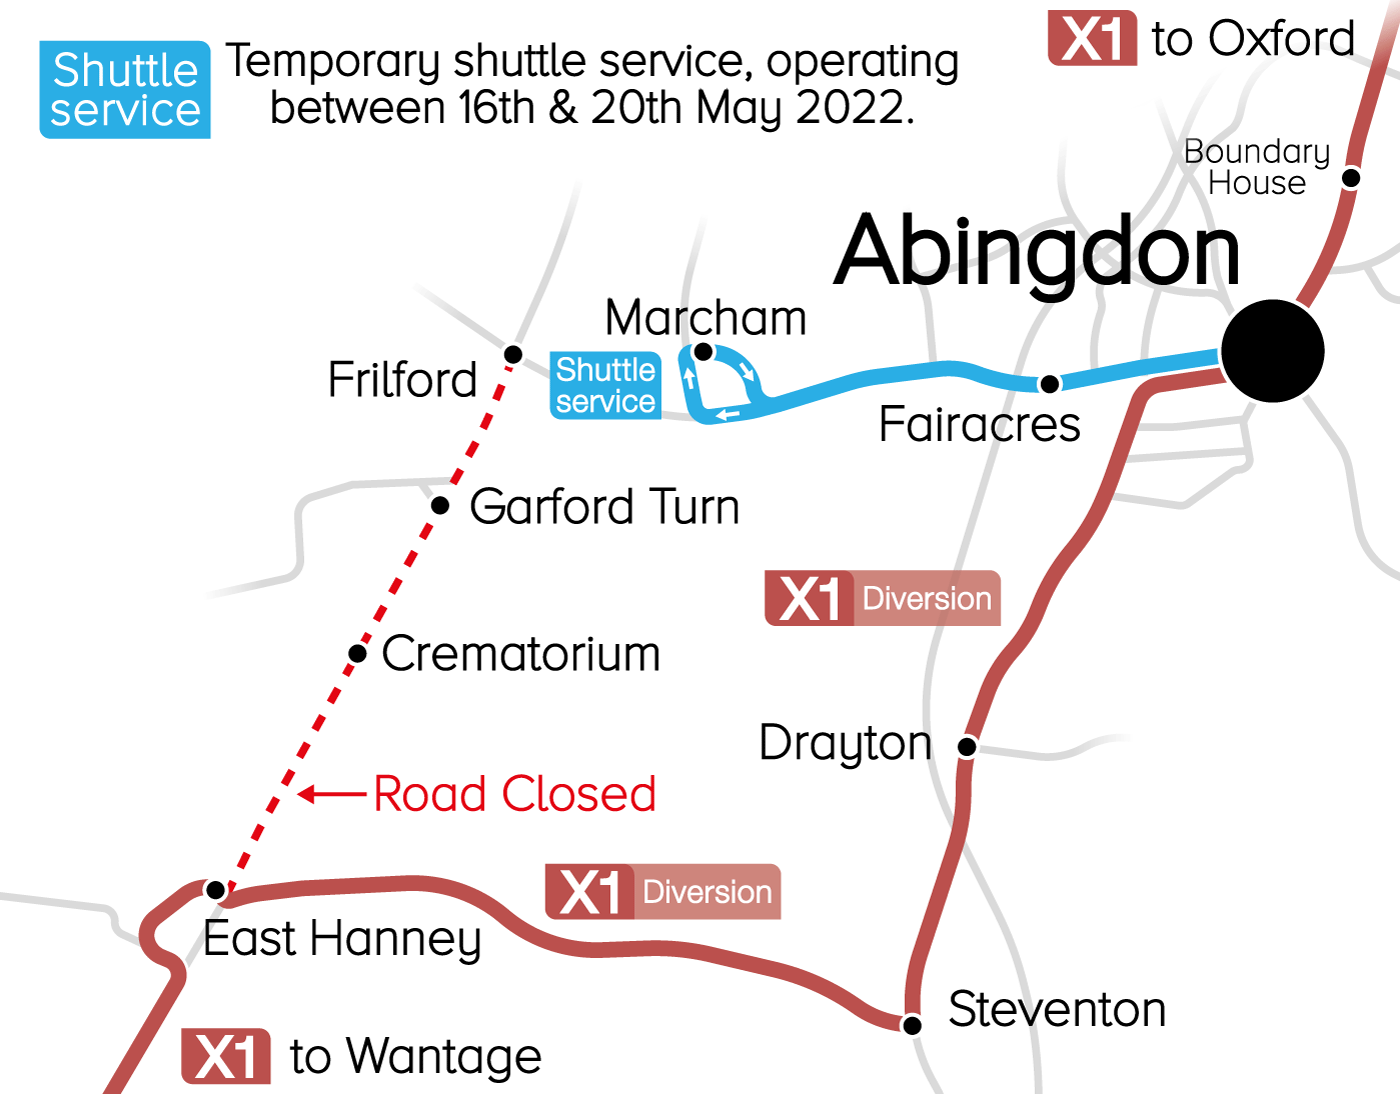 Map of the X1 diversion route.